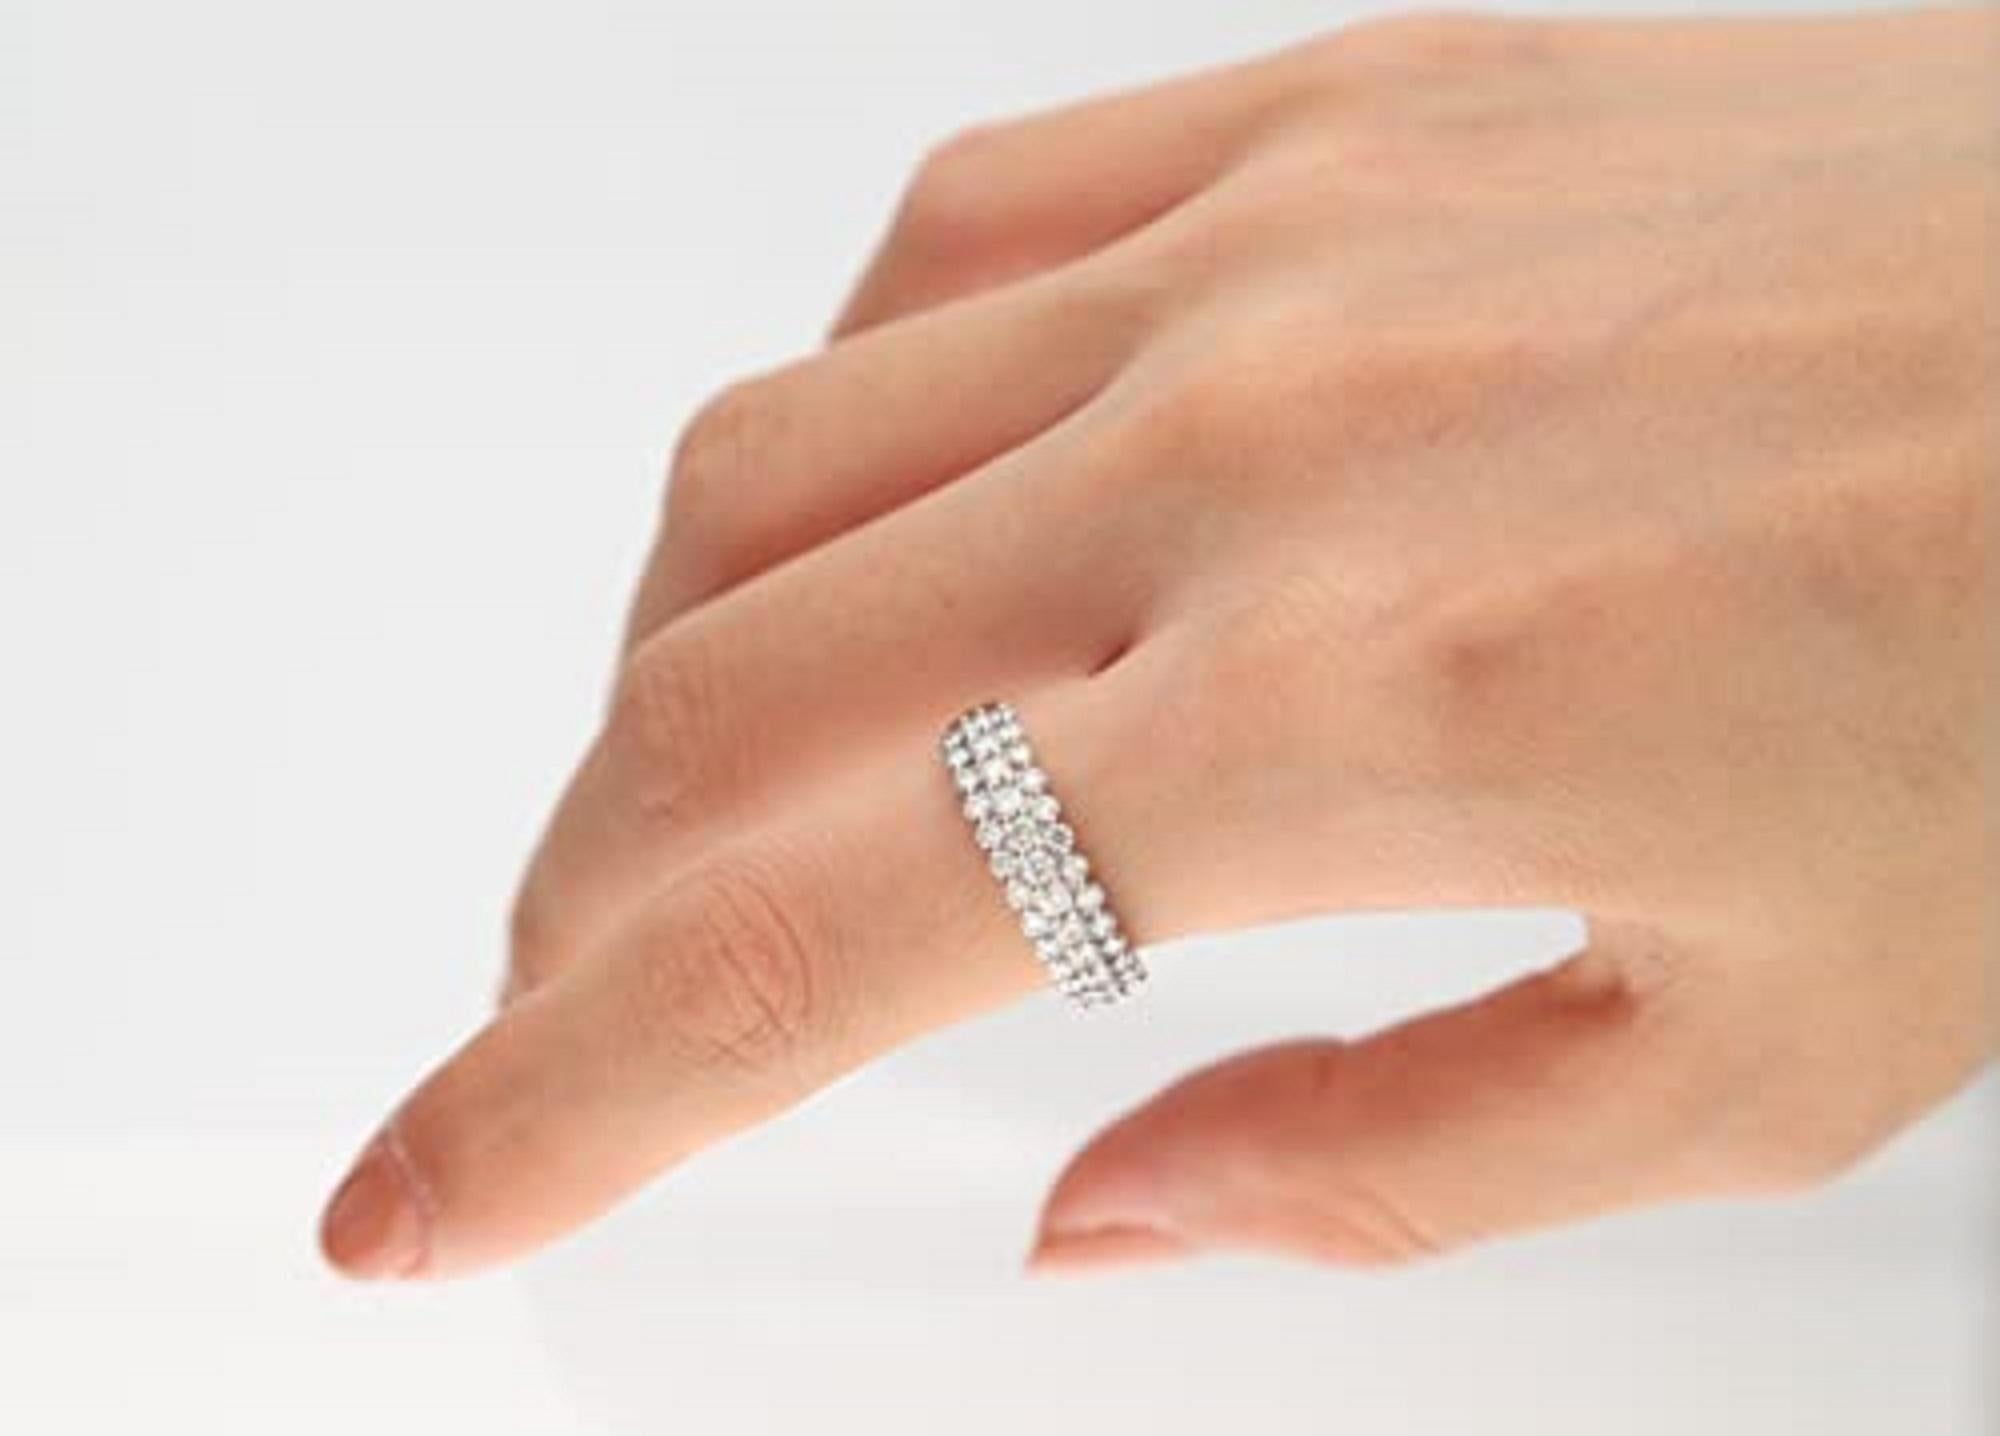 Decorate yourself in elegance with this Ring is crafted from 14-karat White Gold by Gin & Grace. This Ring is made up of Round-cut Prong-Setting White Diamond (38 Pcs) 1.10 Carat . This Ring is weight 3.52 grams. This delicate Ring is polished to a